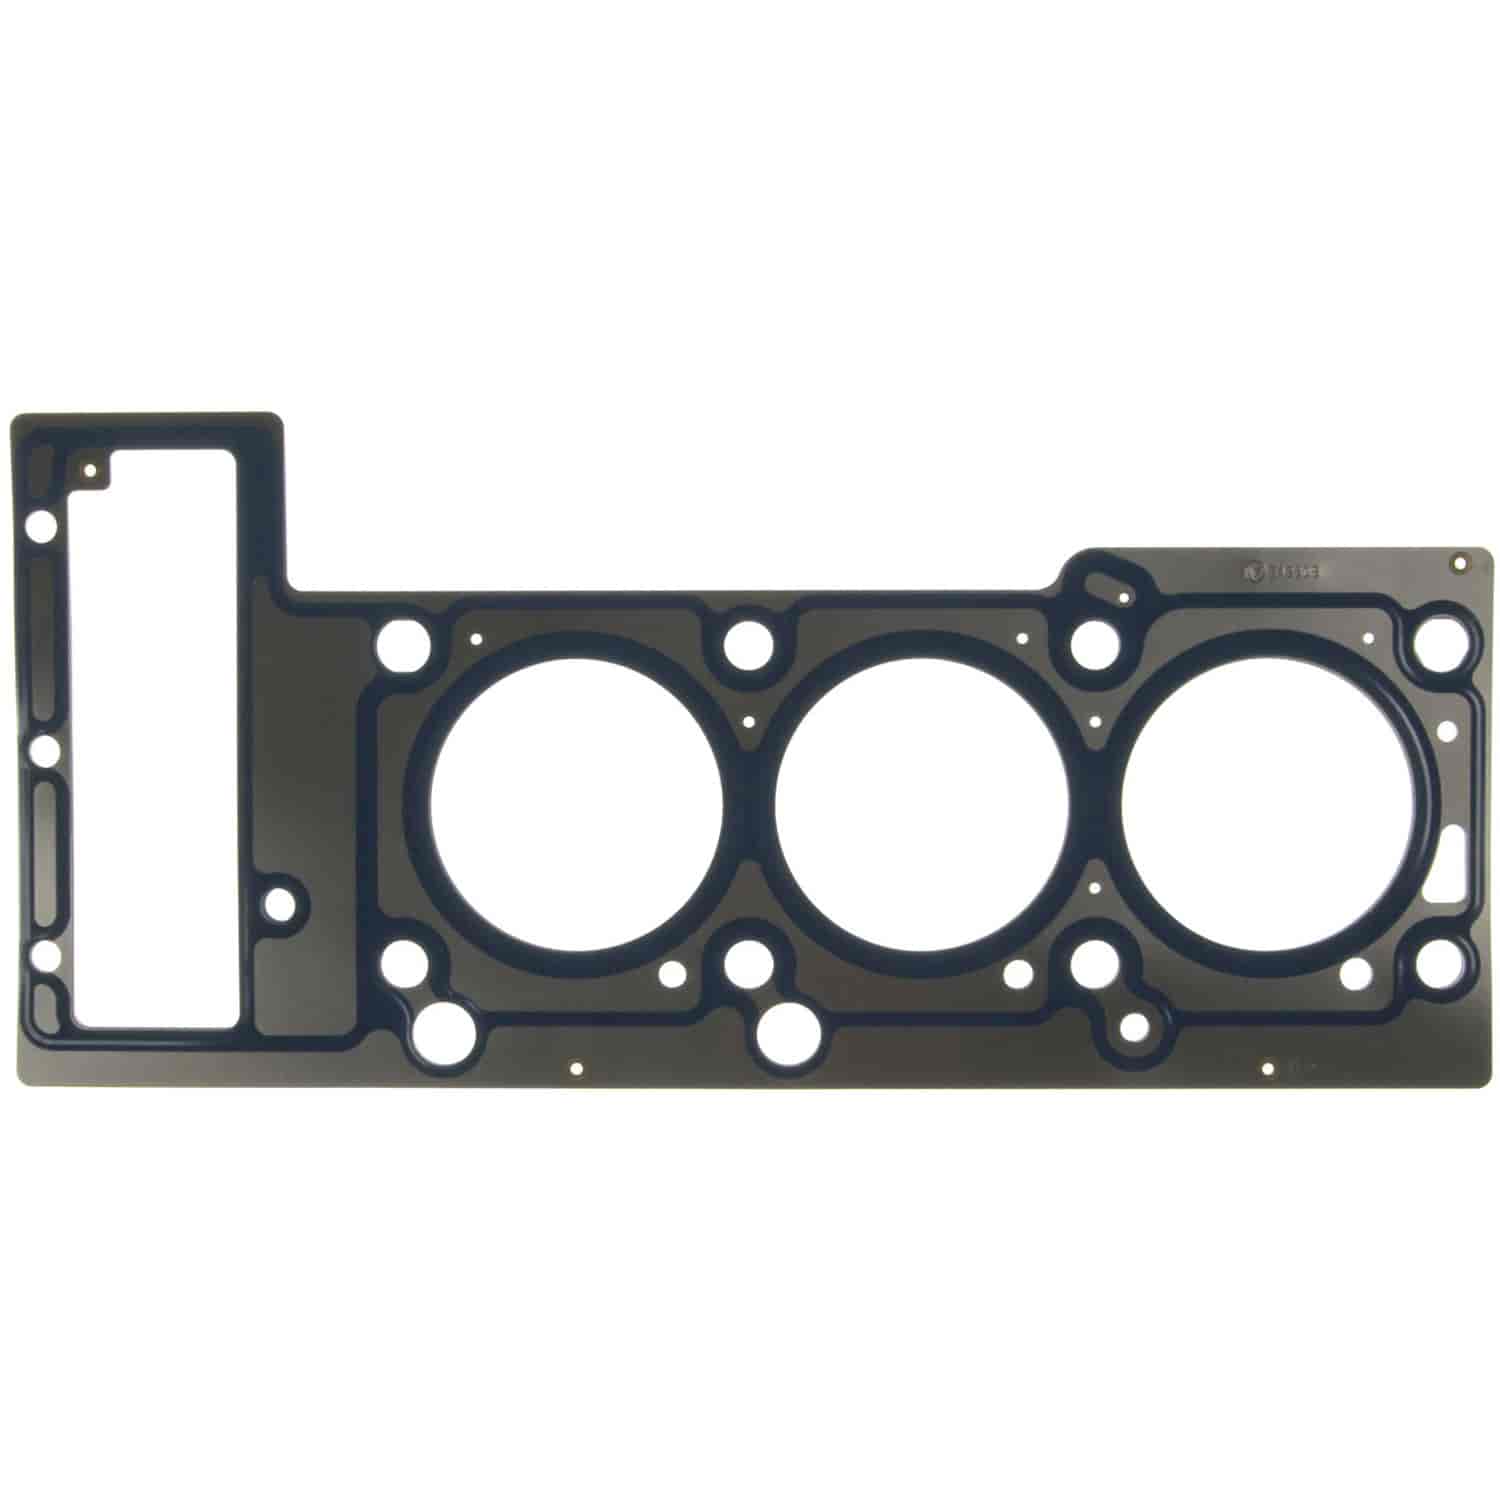 Cylinder Head Gasket Right Chry-Pass 167 2.7L V6 Eng. 1998-2002 R/H